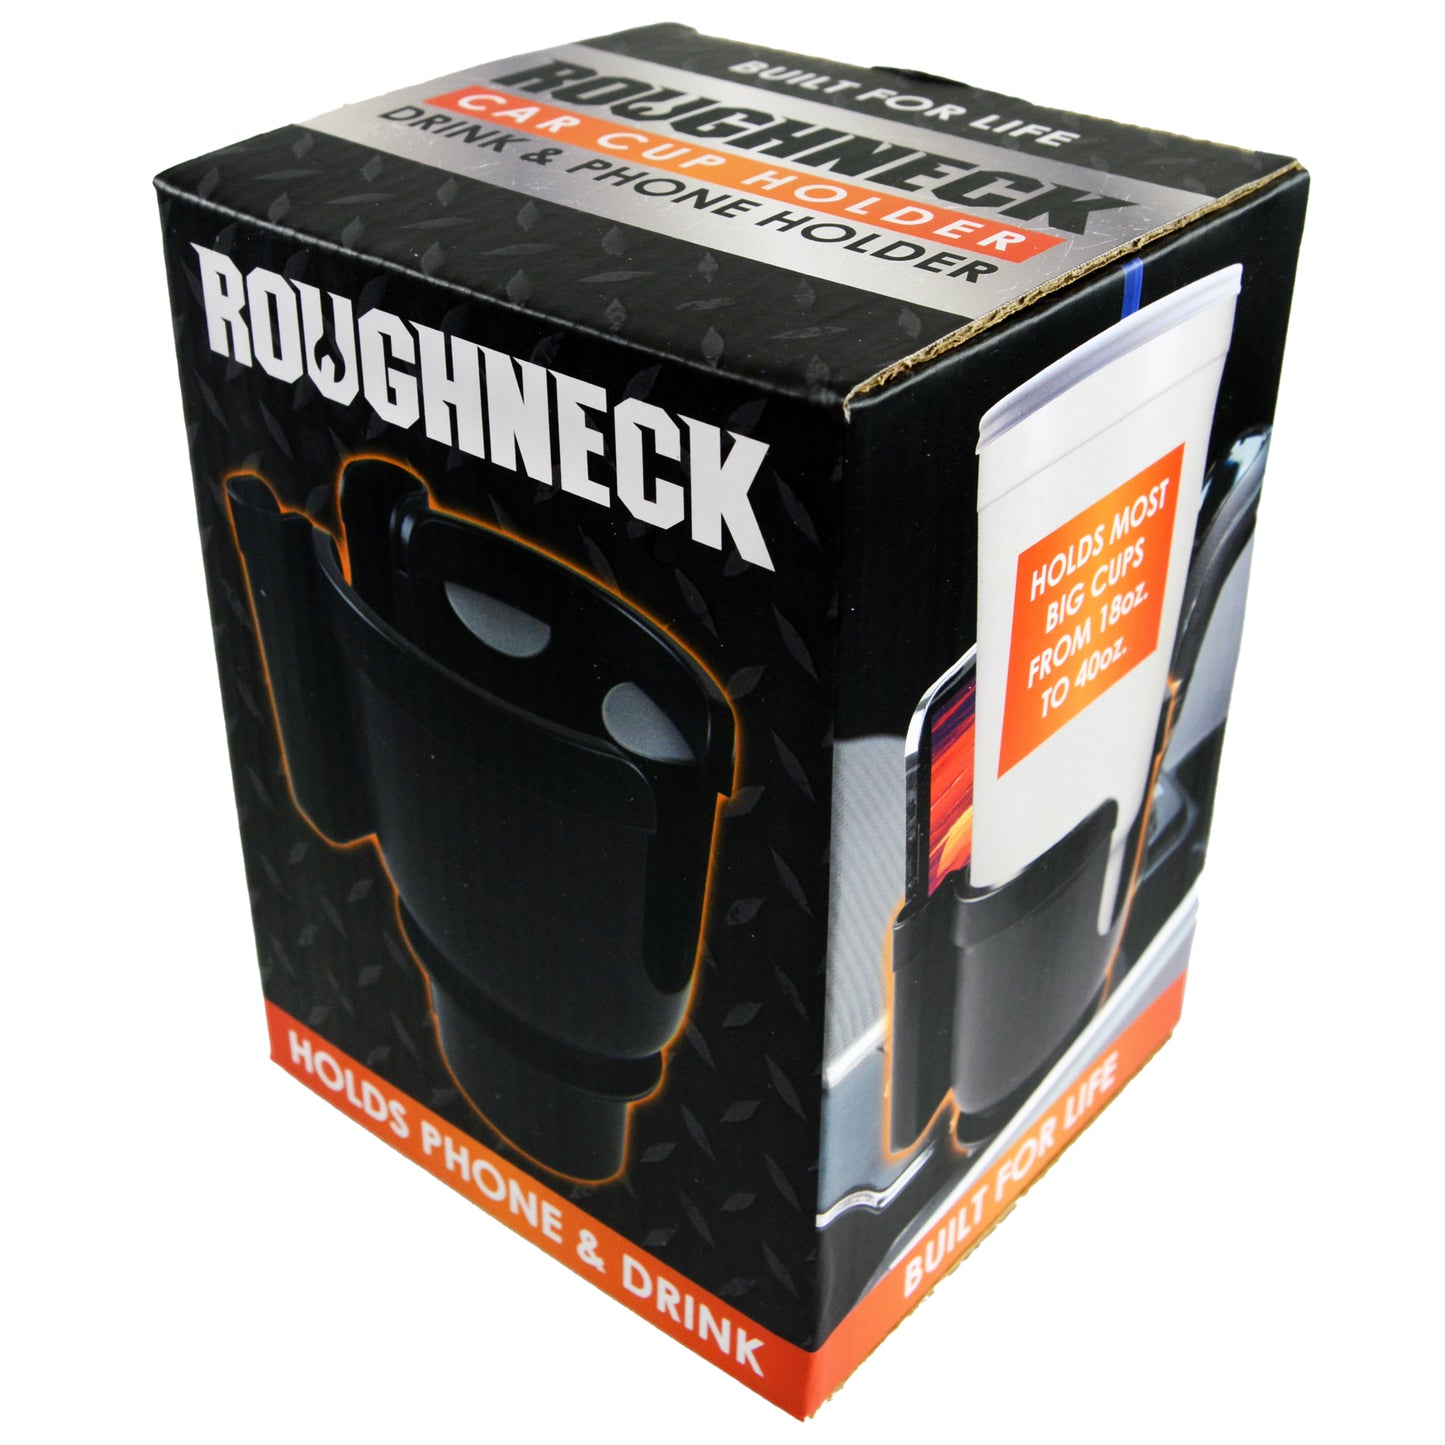 ITEM NUMBER 023063 ROUGHNECK CUP CELL PHONE HOLDER 6 PIECES PER DISPLAY